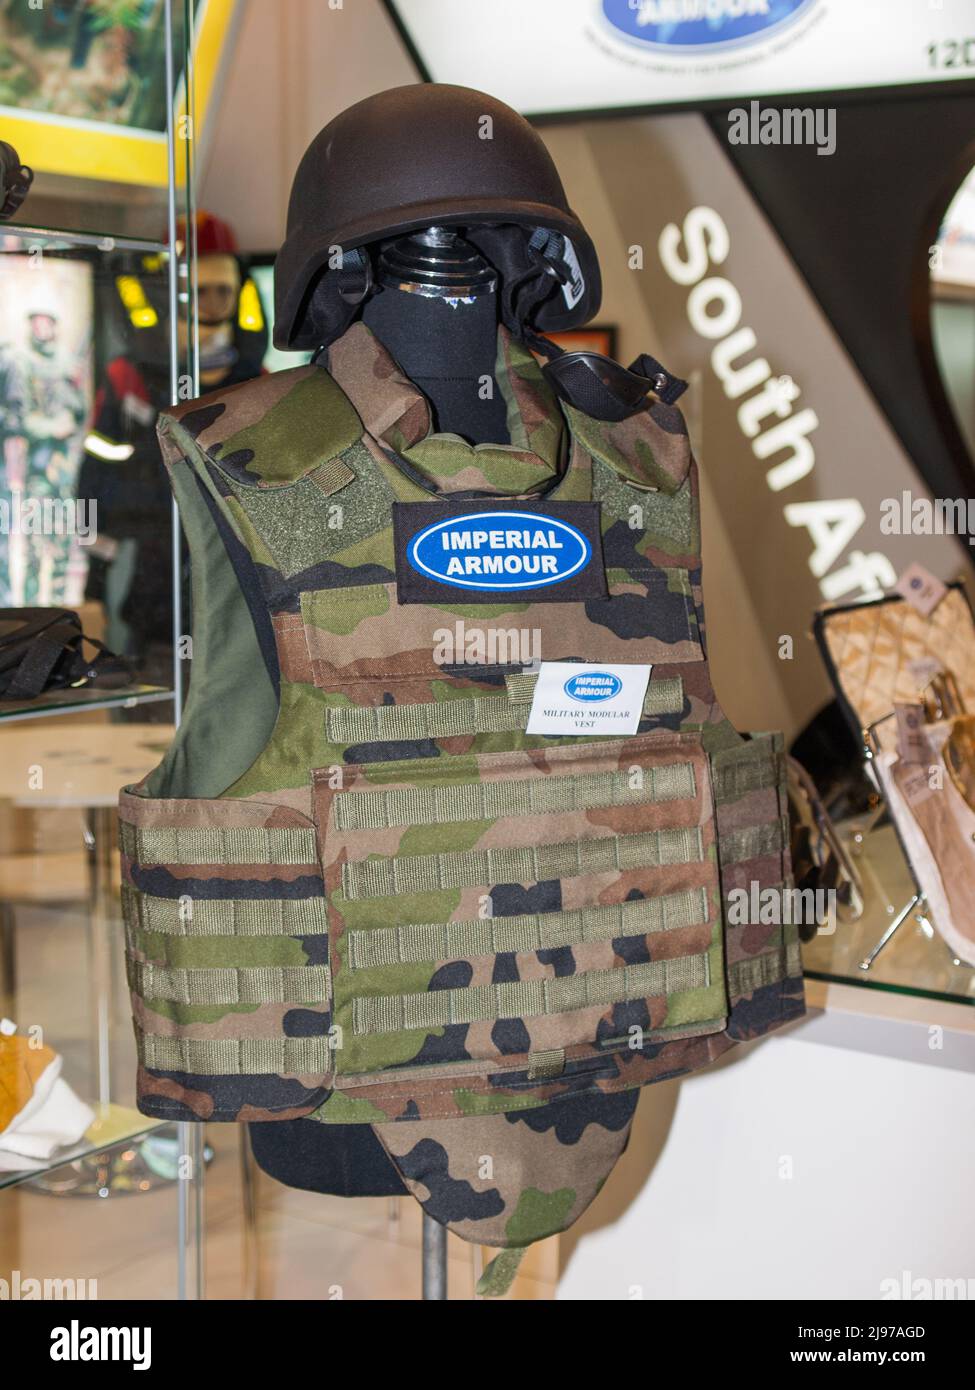 Abu Dhabi, UAE - Feb.23. 2011: South African Imperial armour Military modular vest at IDEX 2011 Stock Photo